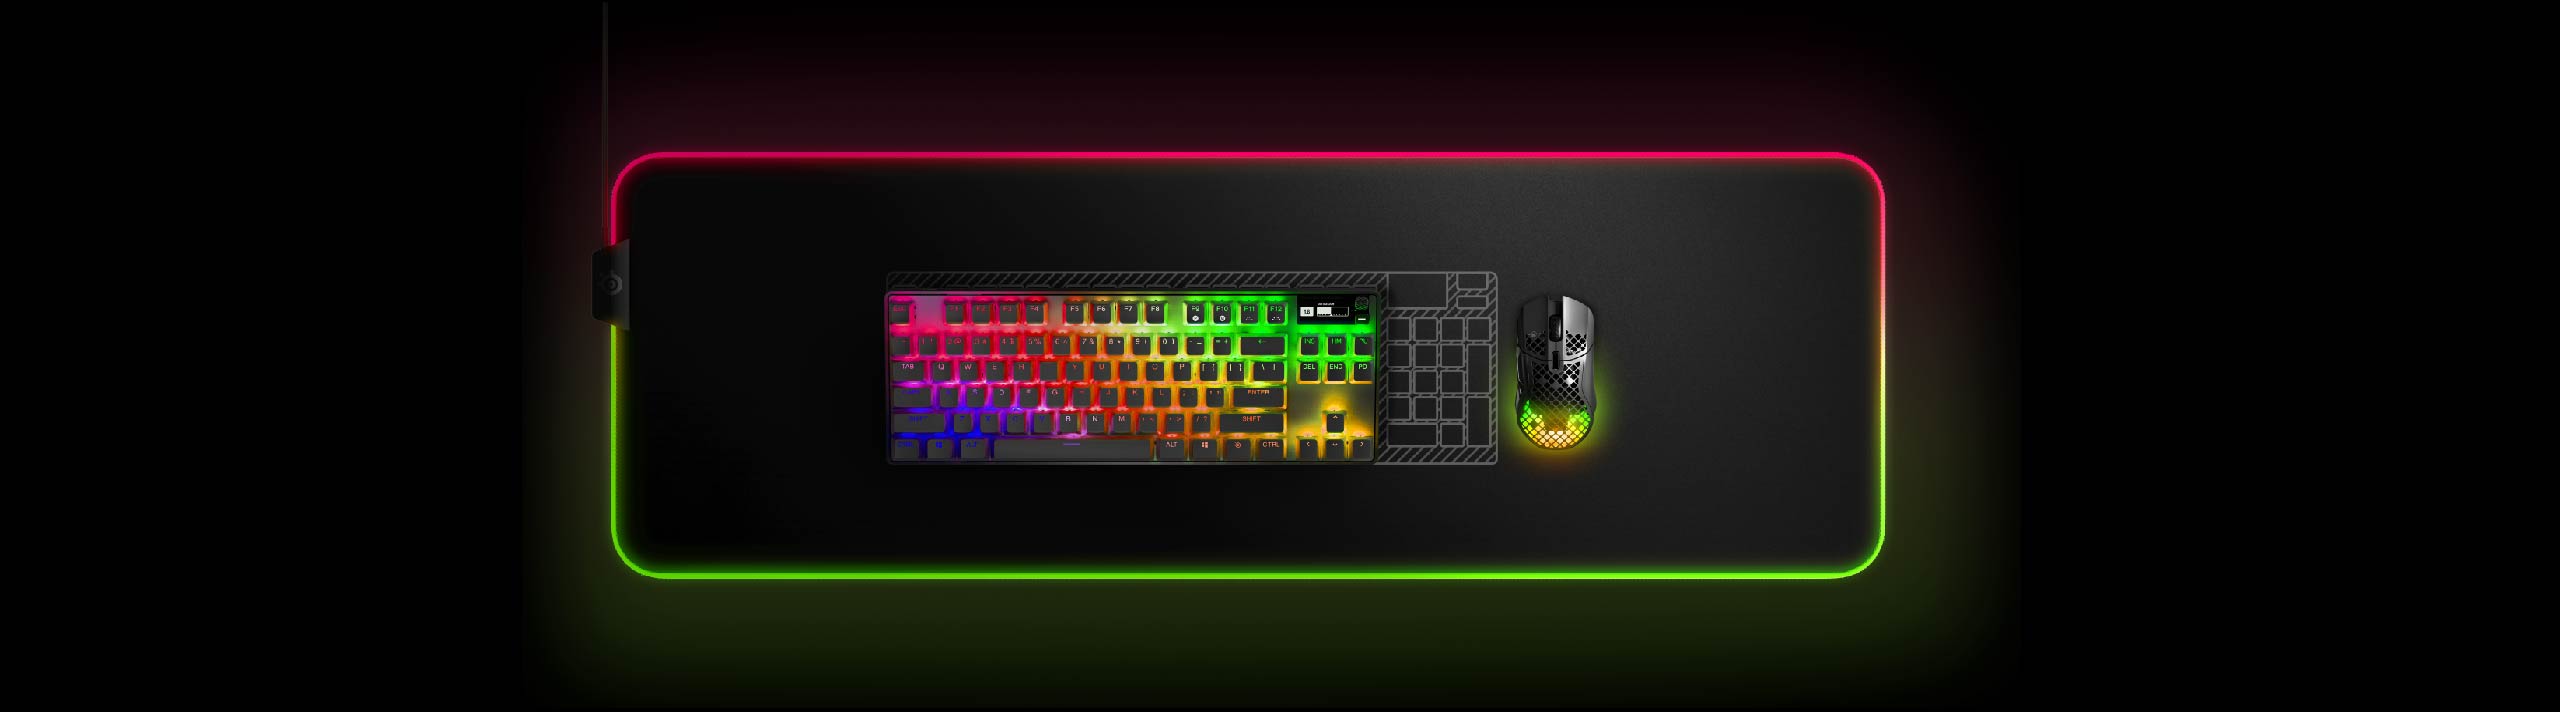 SteelSeries introduces the new Apex Pro TKL series keyboards